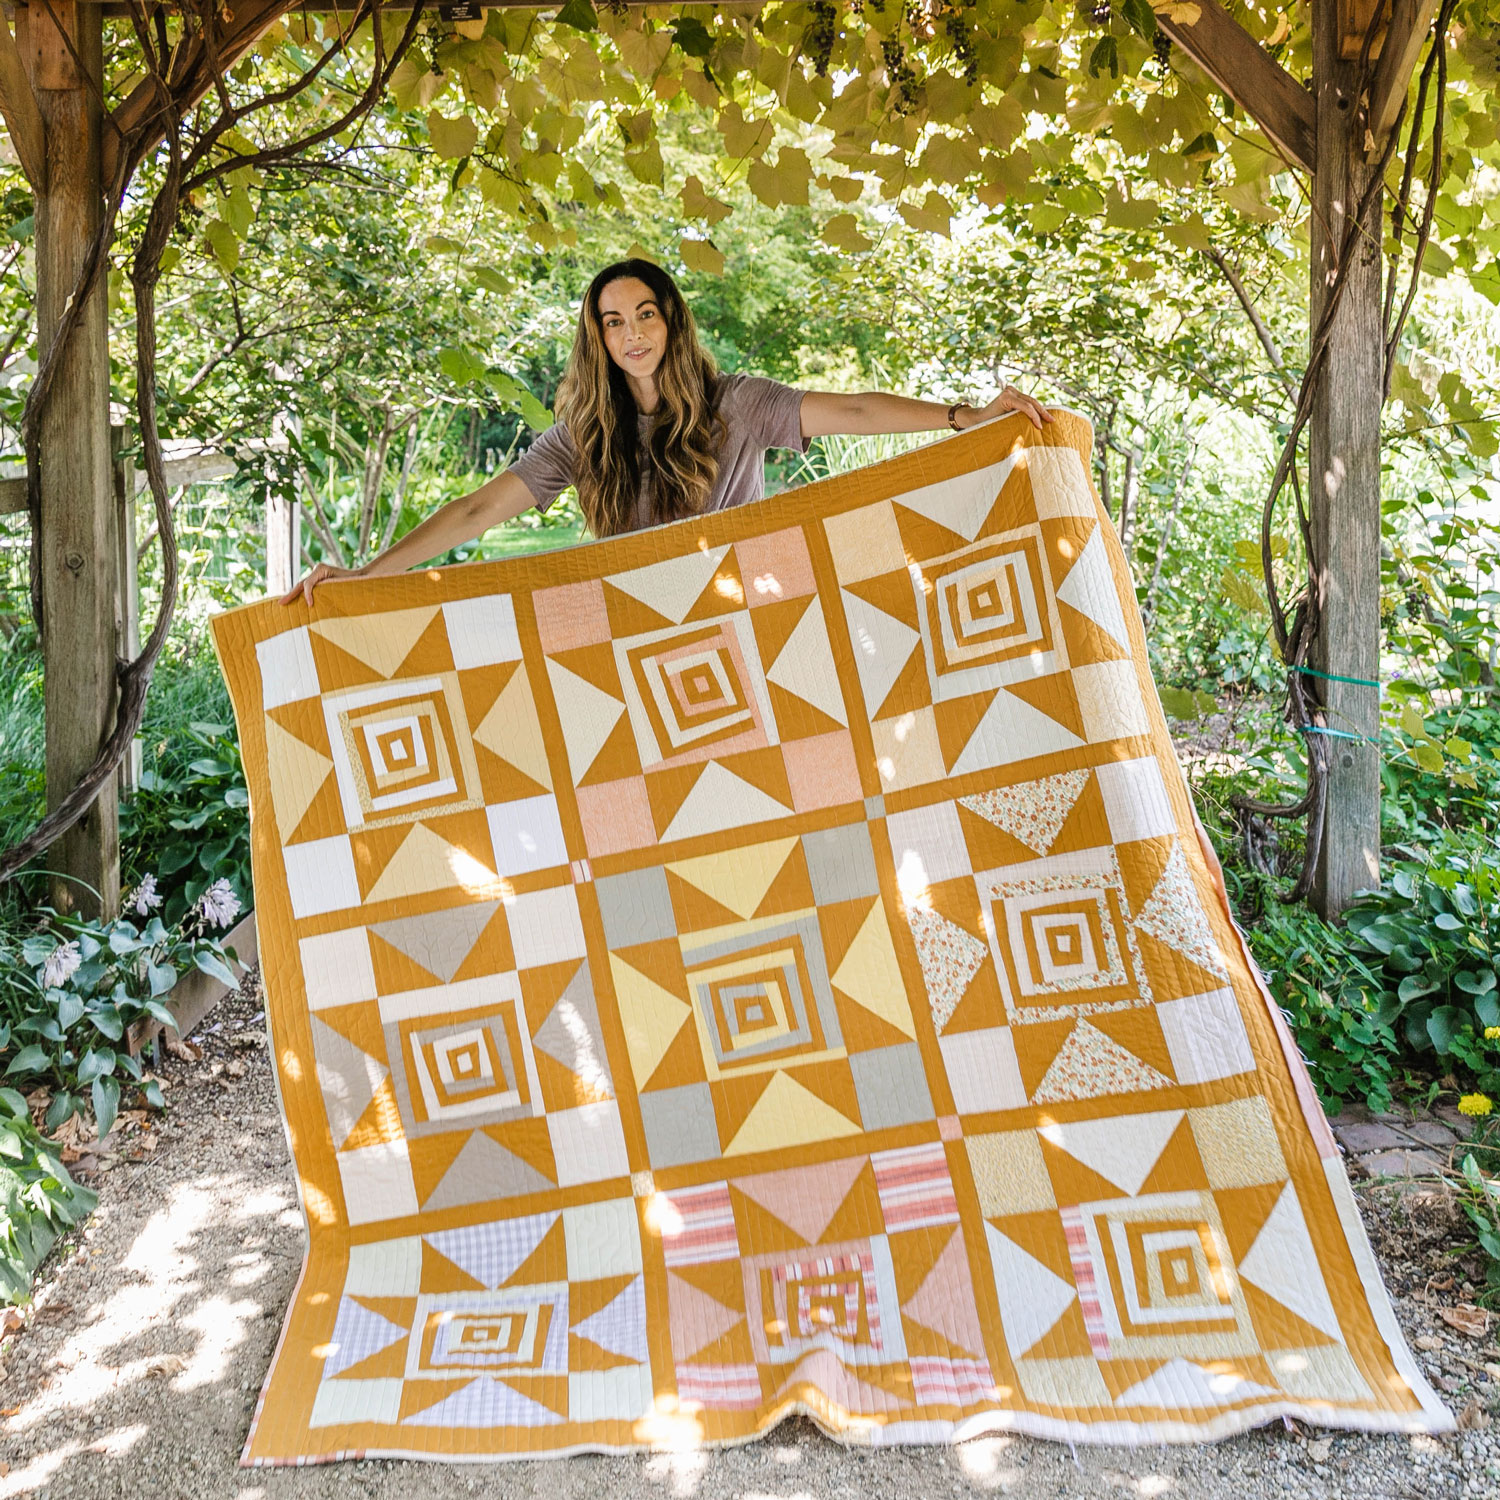 Join the Shining Star quilt sew along for extra tips on making this beautiful quilt pattern!